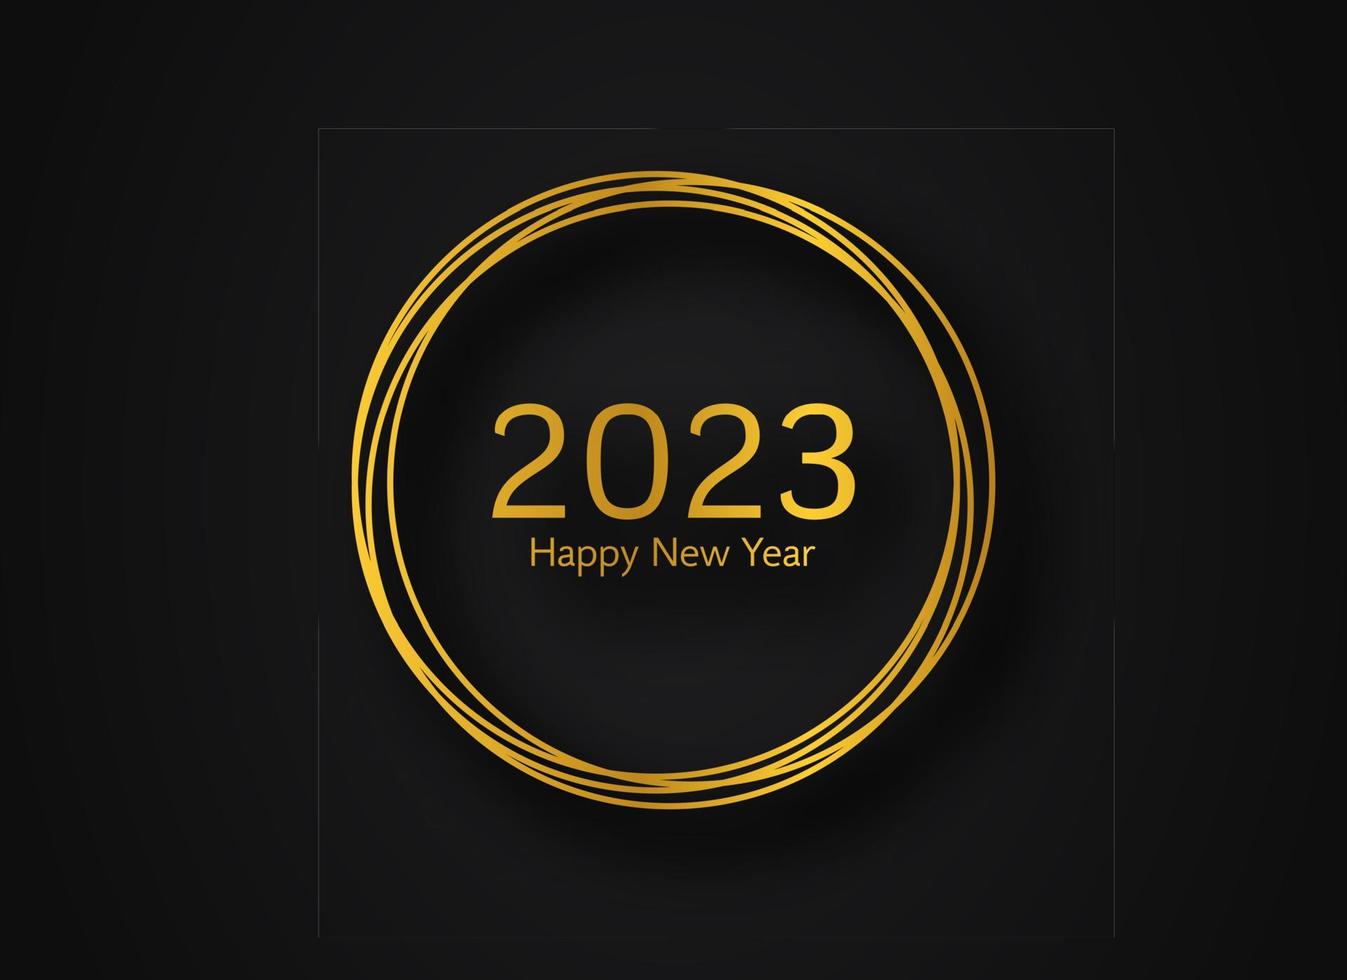 2023 Happy New Year gold geometric polygonal background vector